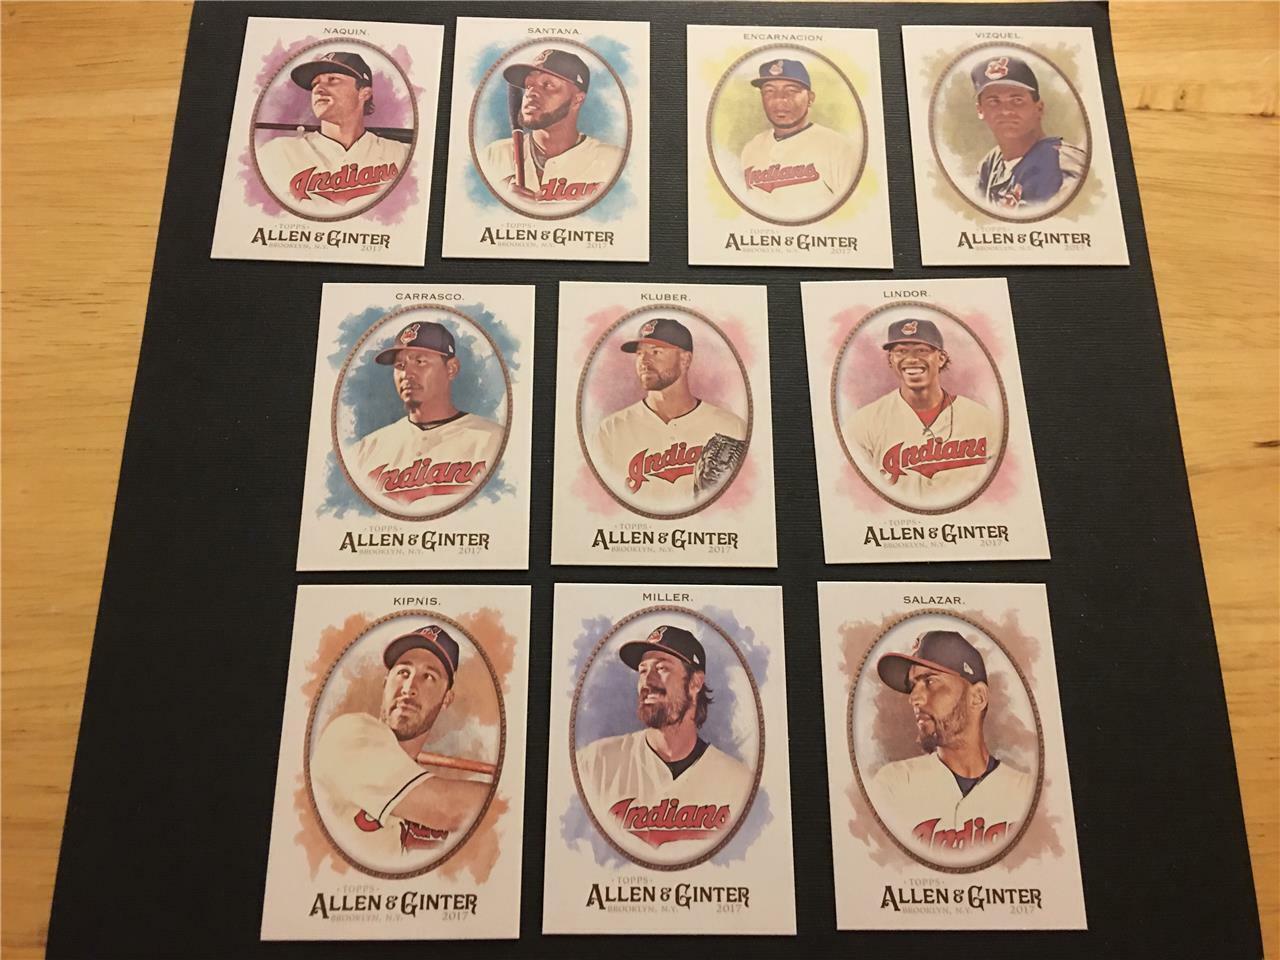 2017 Topps Allen Ginter Cleveland Indians Max 55% OFF Team Wi Set Cards 10 Free shipping